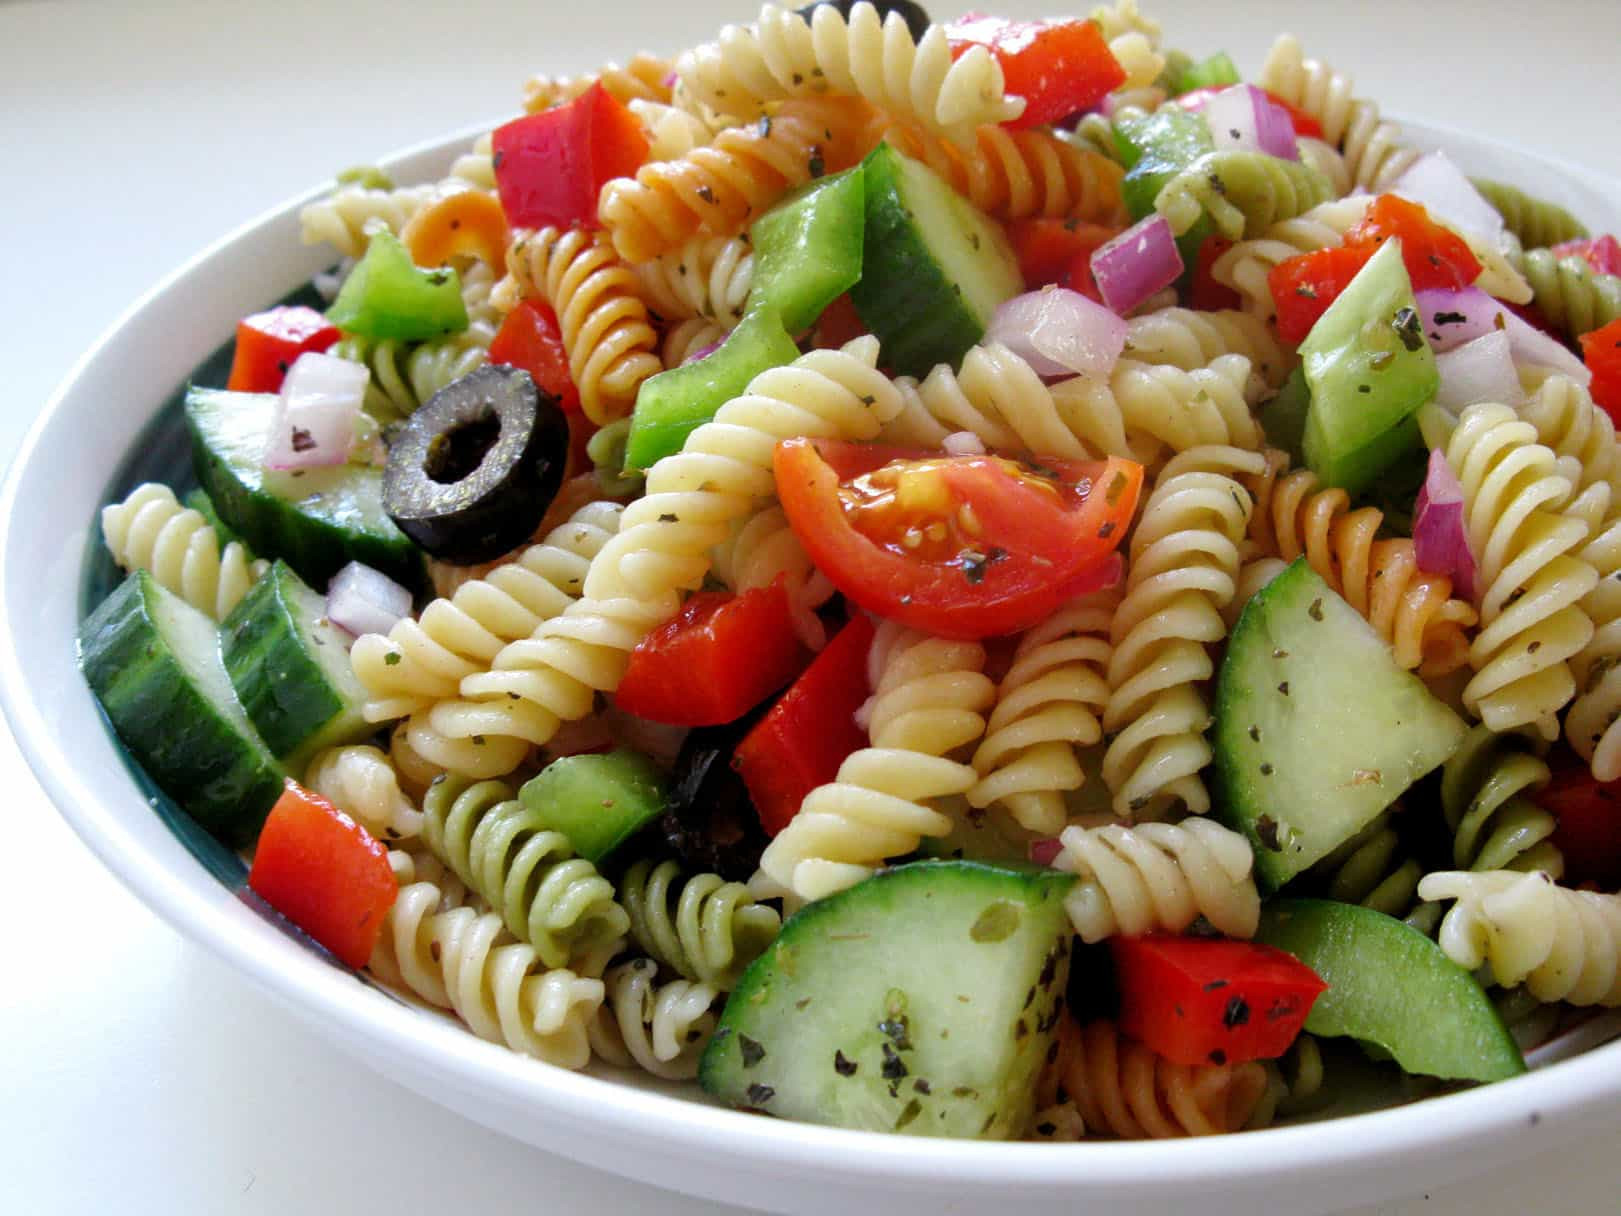 Summer Pasta Salad Recipes
 Try Out This Recipe For Tasty Summer Pasta Salad